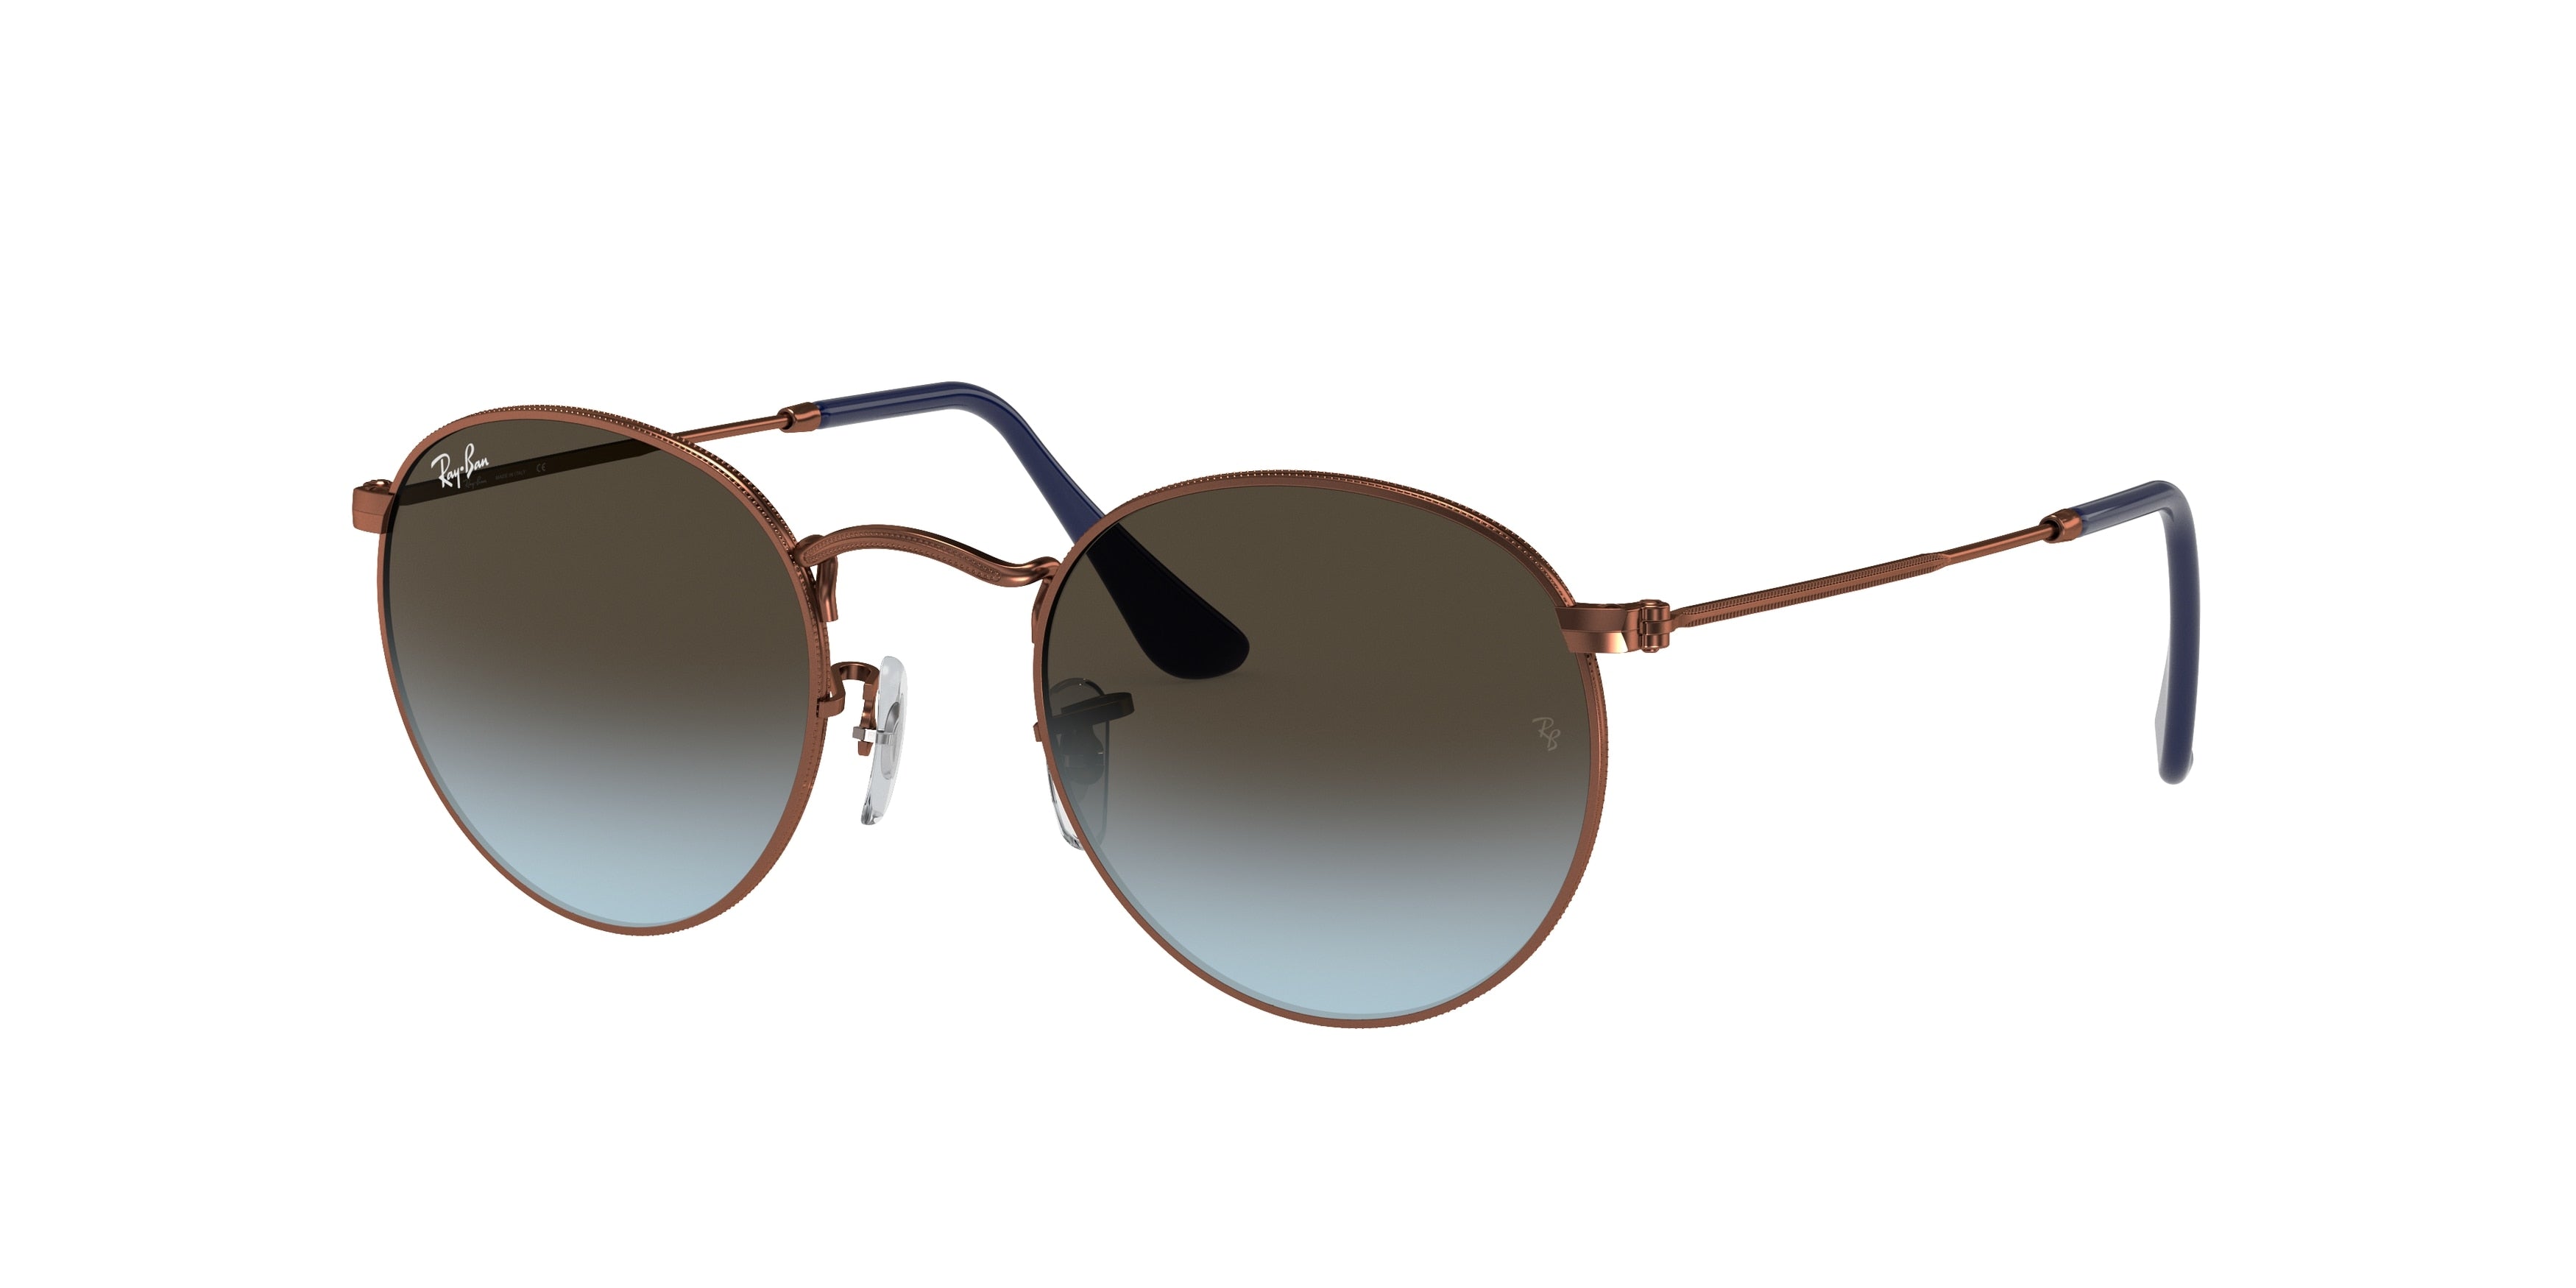 Ray-Ban ROUND METAL RB3447 Round Sunglasses  900396-Bronze-Copper 52-145-21 - Color Map Copper